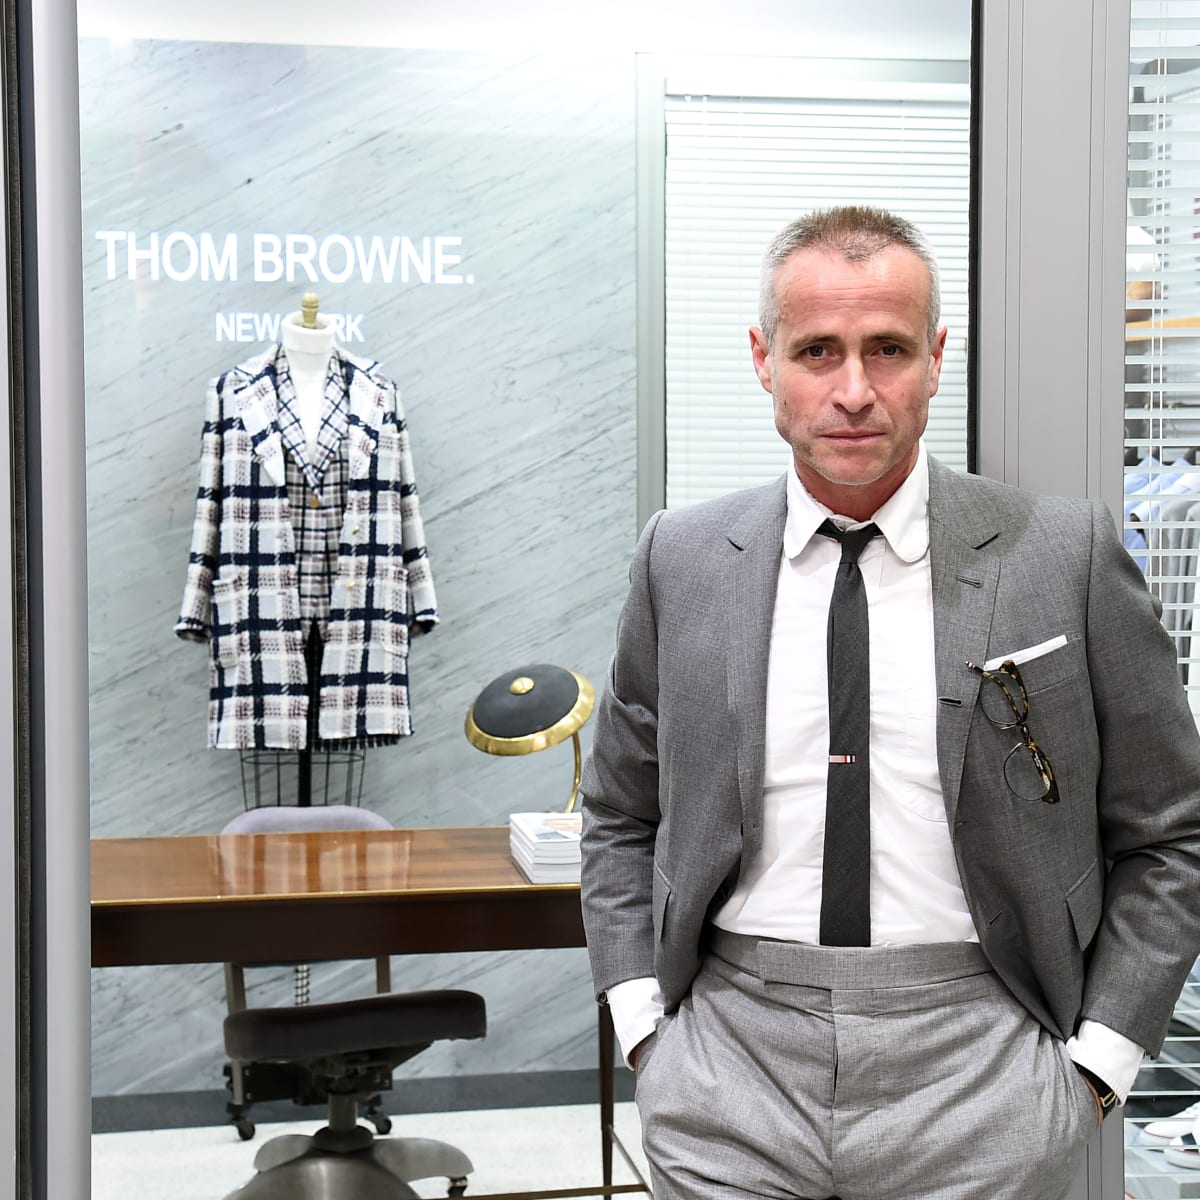 Everything You Need to Know About the Adidas vs. Thom Browne